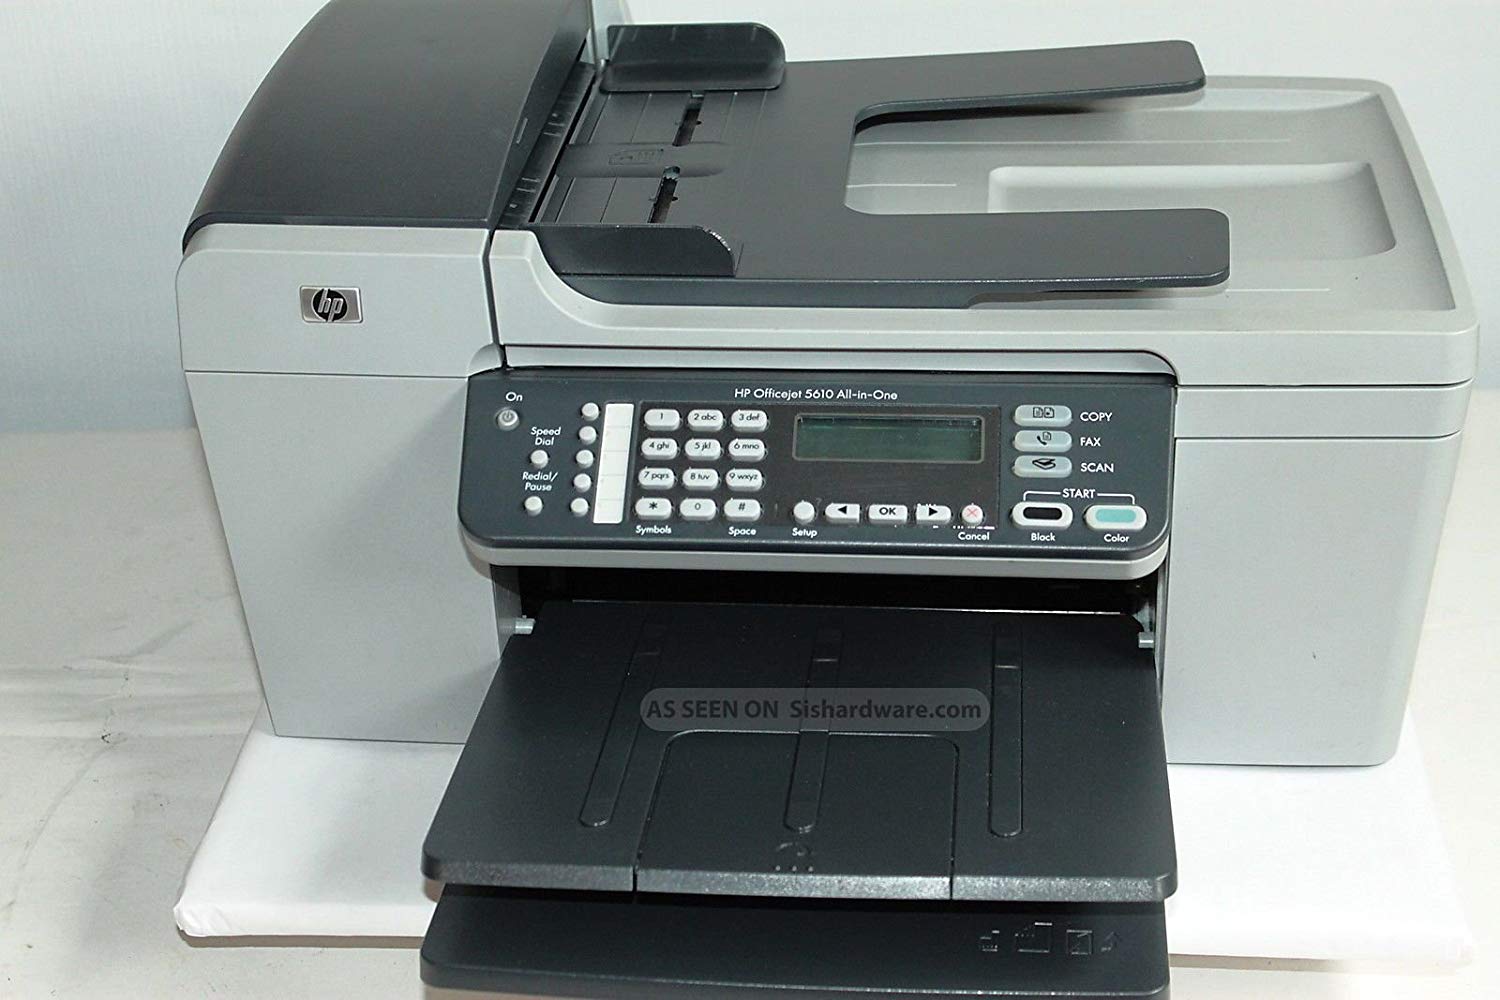 Hp officejet 5610 all-in-one driver download